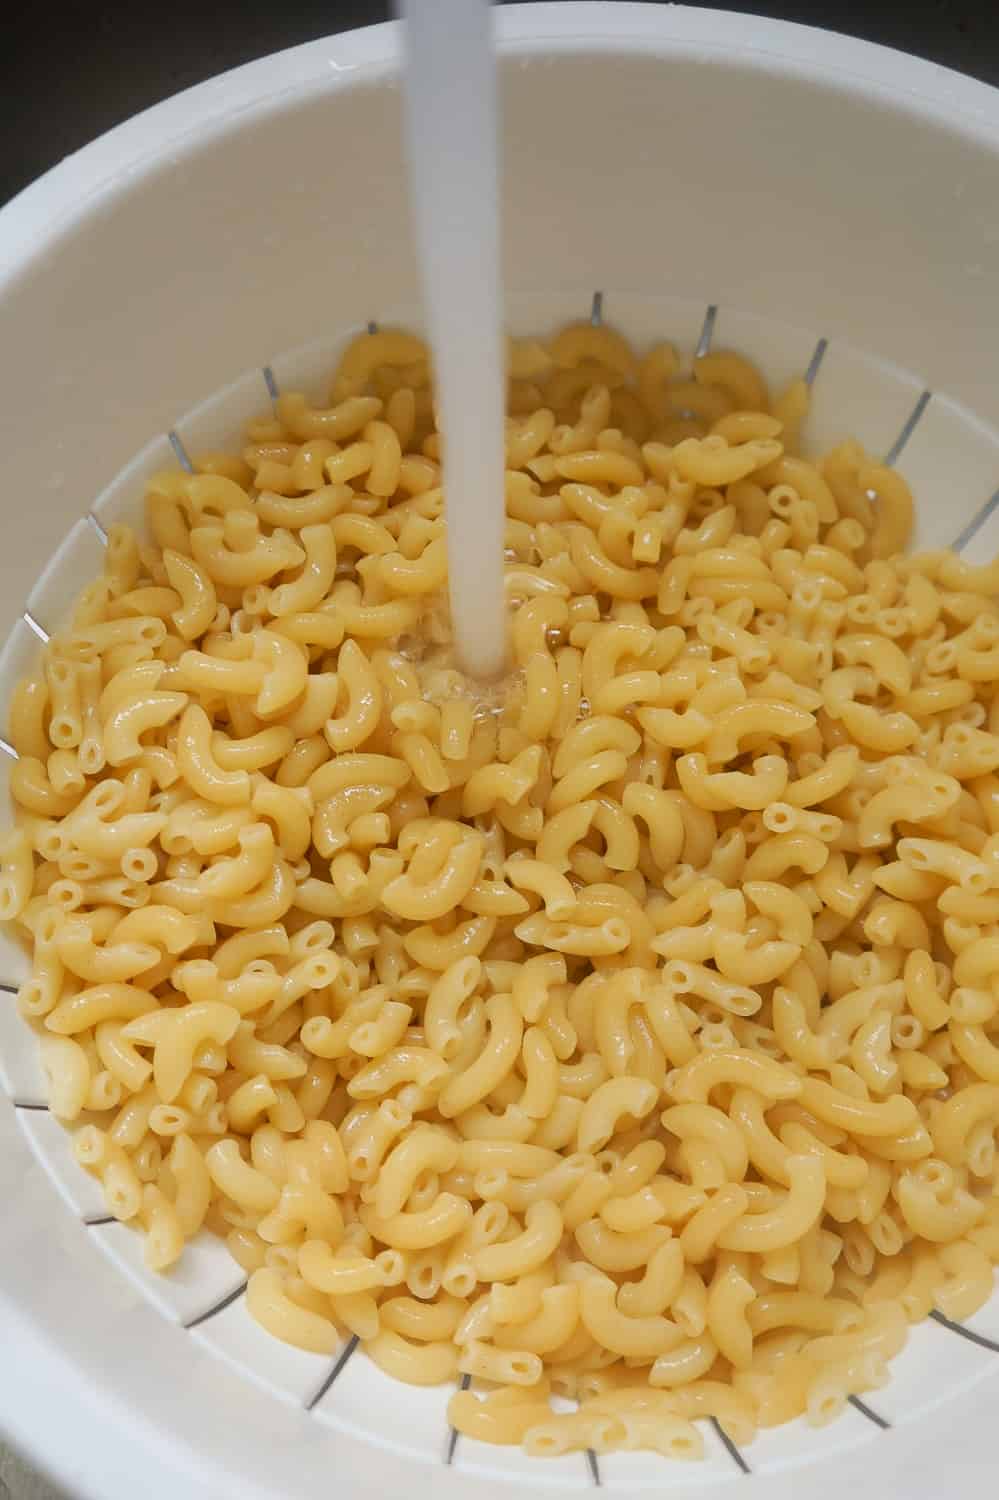 cooked macaroni cooling down in the sink